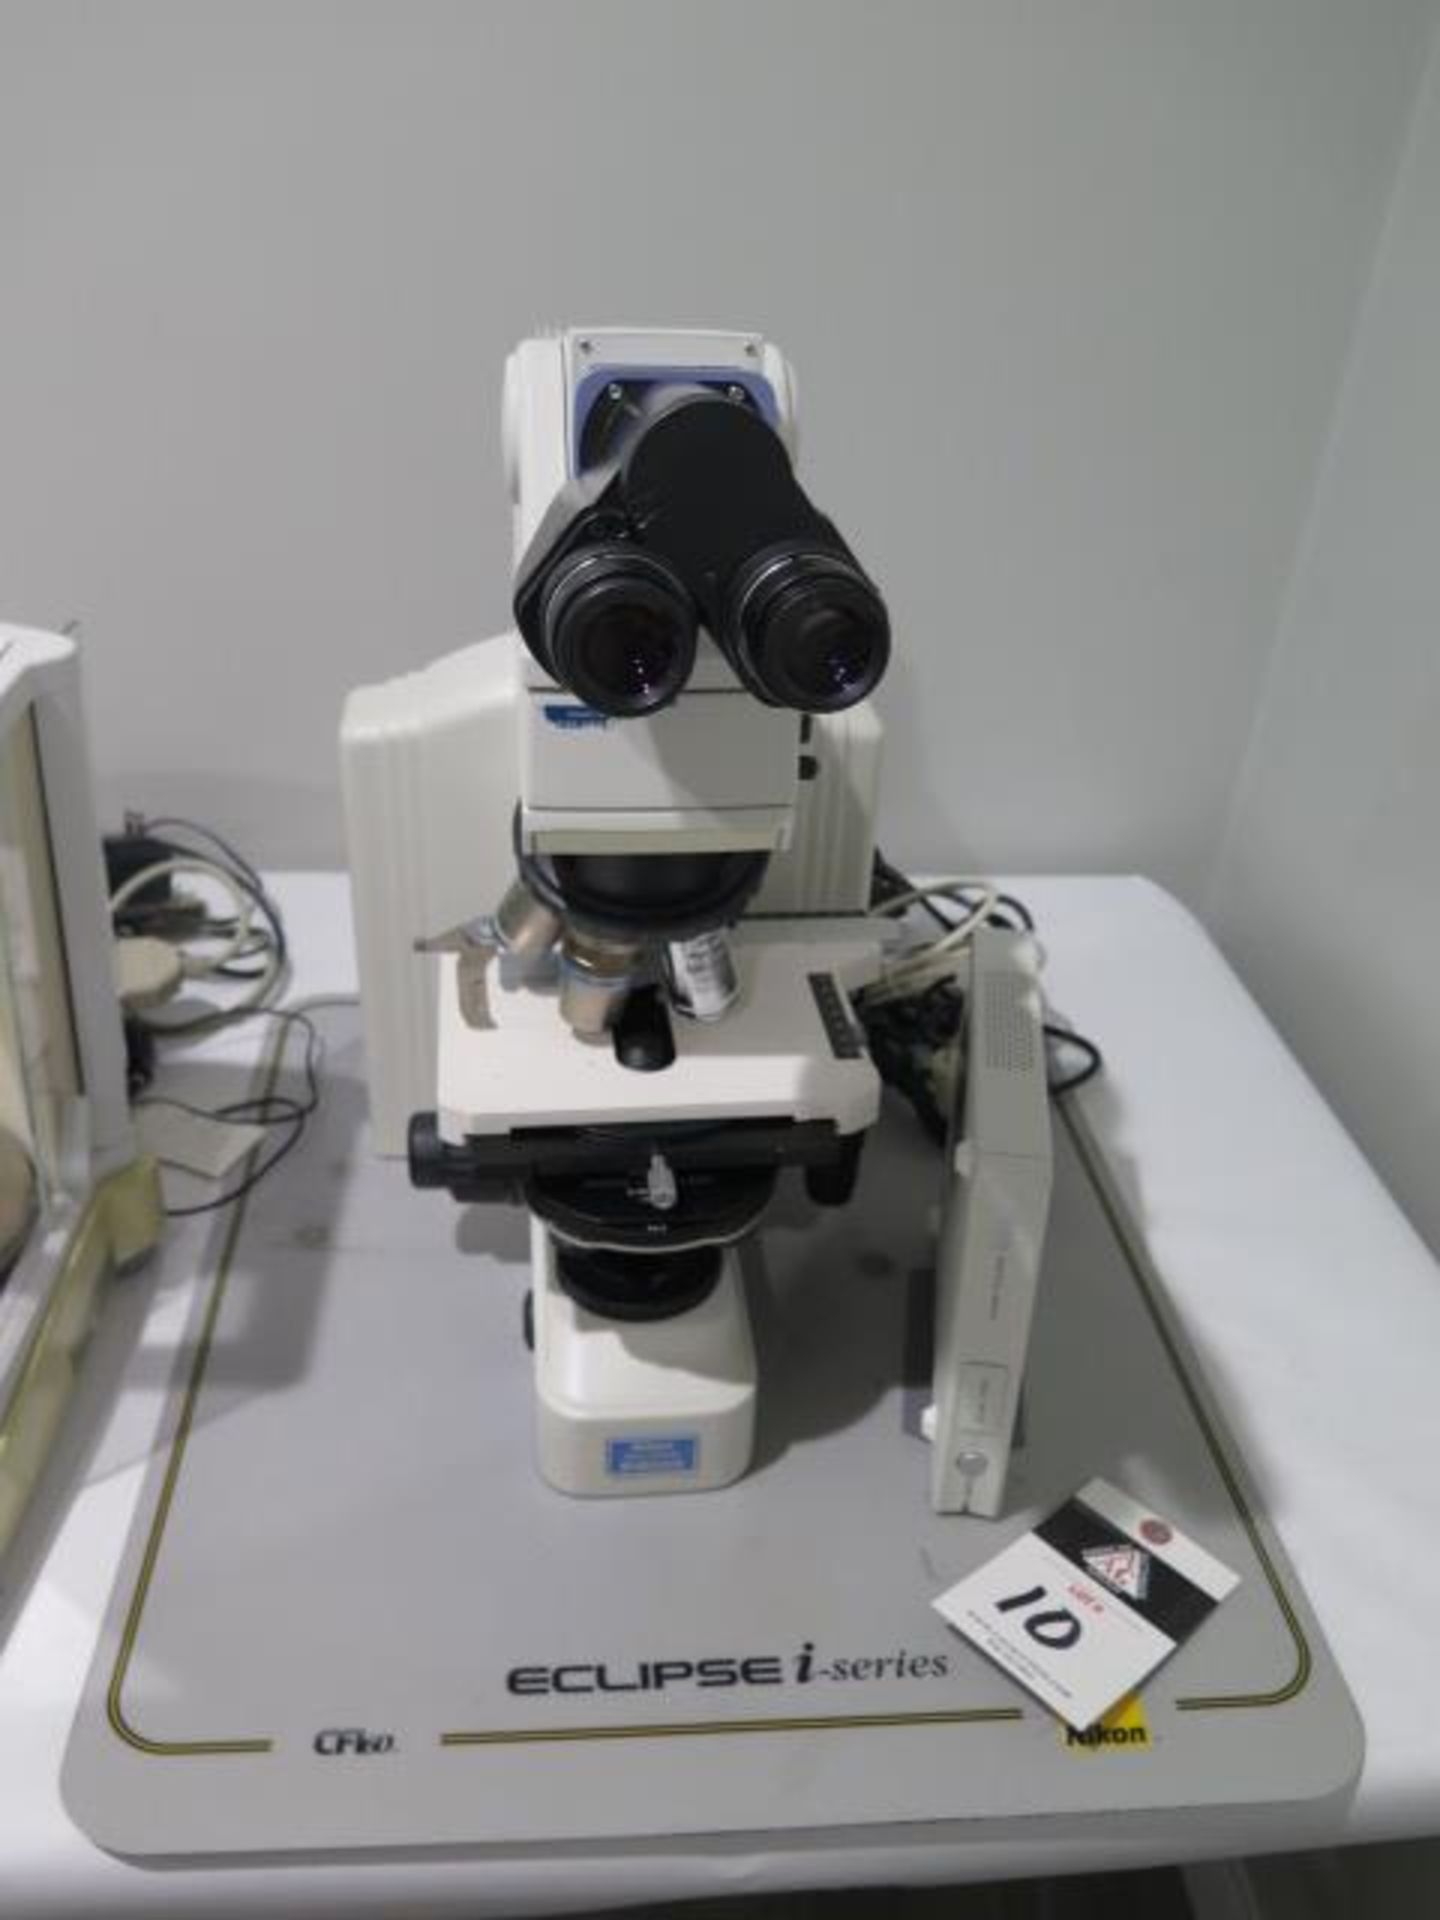 Nikon Eclipse E600 Research Microscope s/n 763673 w/ Nikon Light,DS-U2 Digital Sight Unit,SOLD AS IS - Image 2 of 15